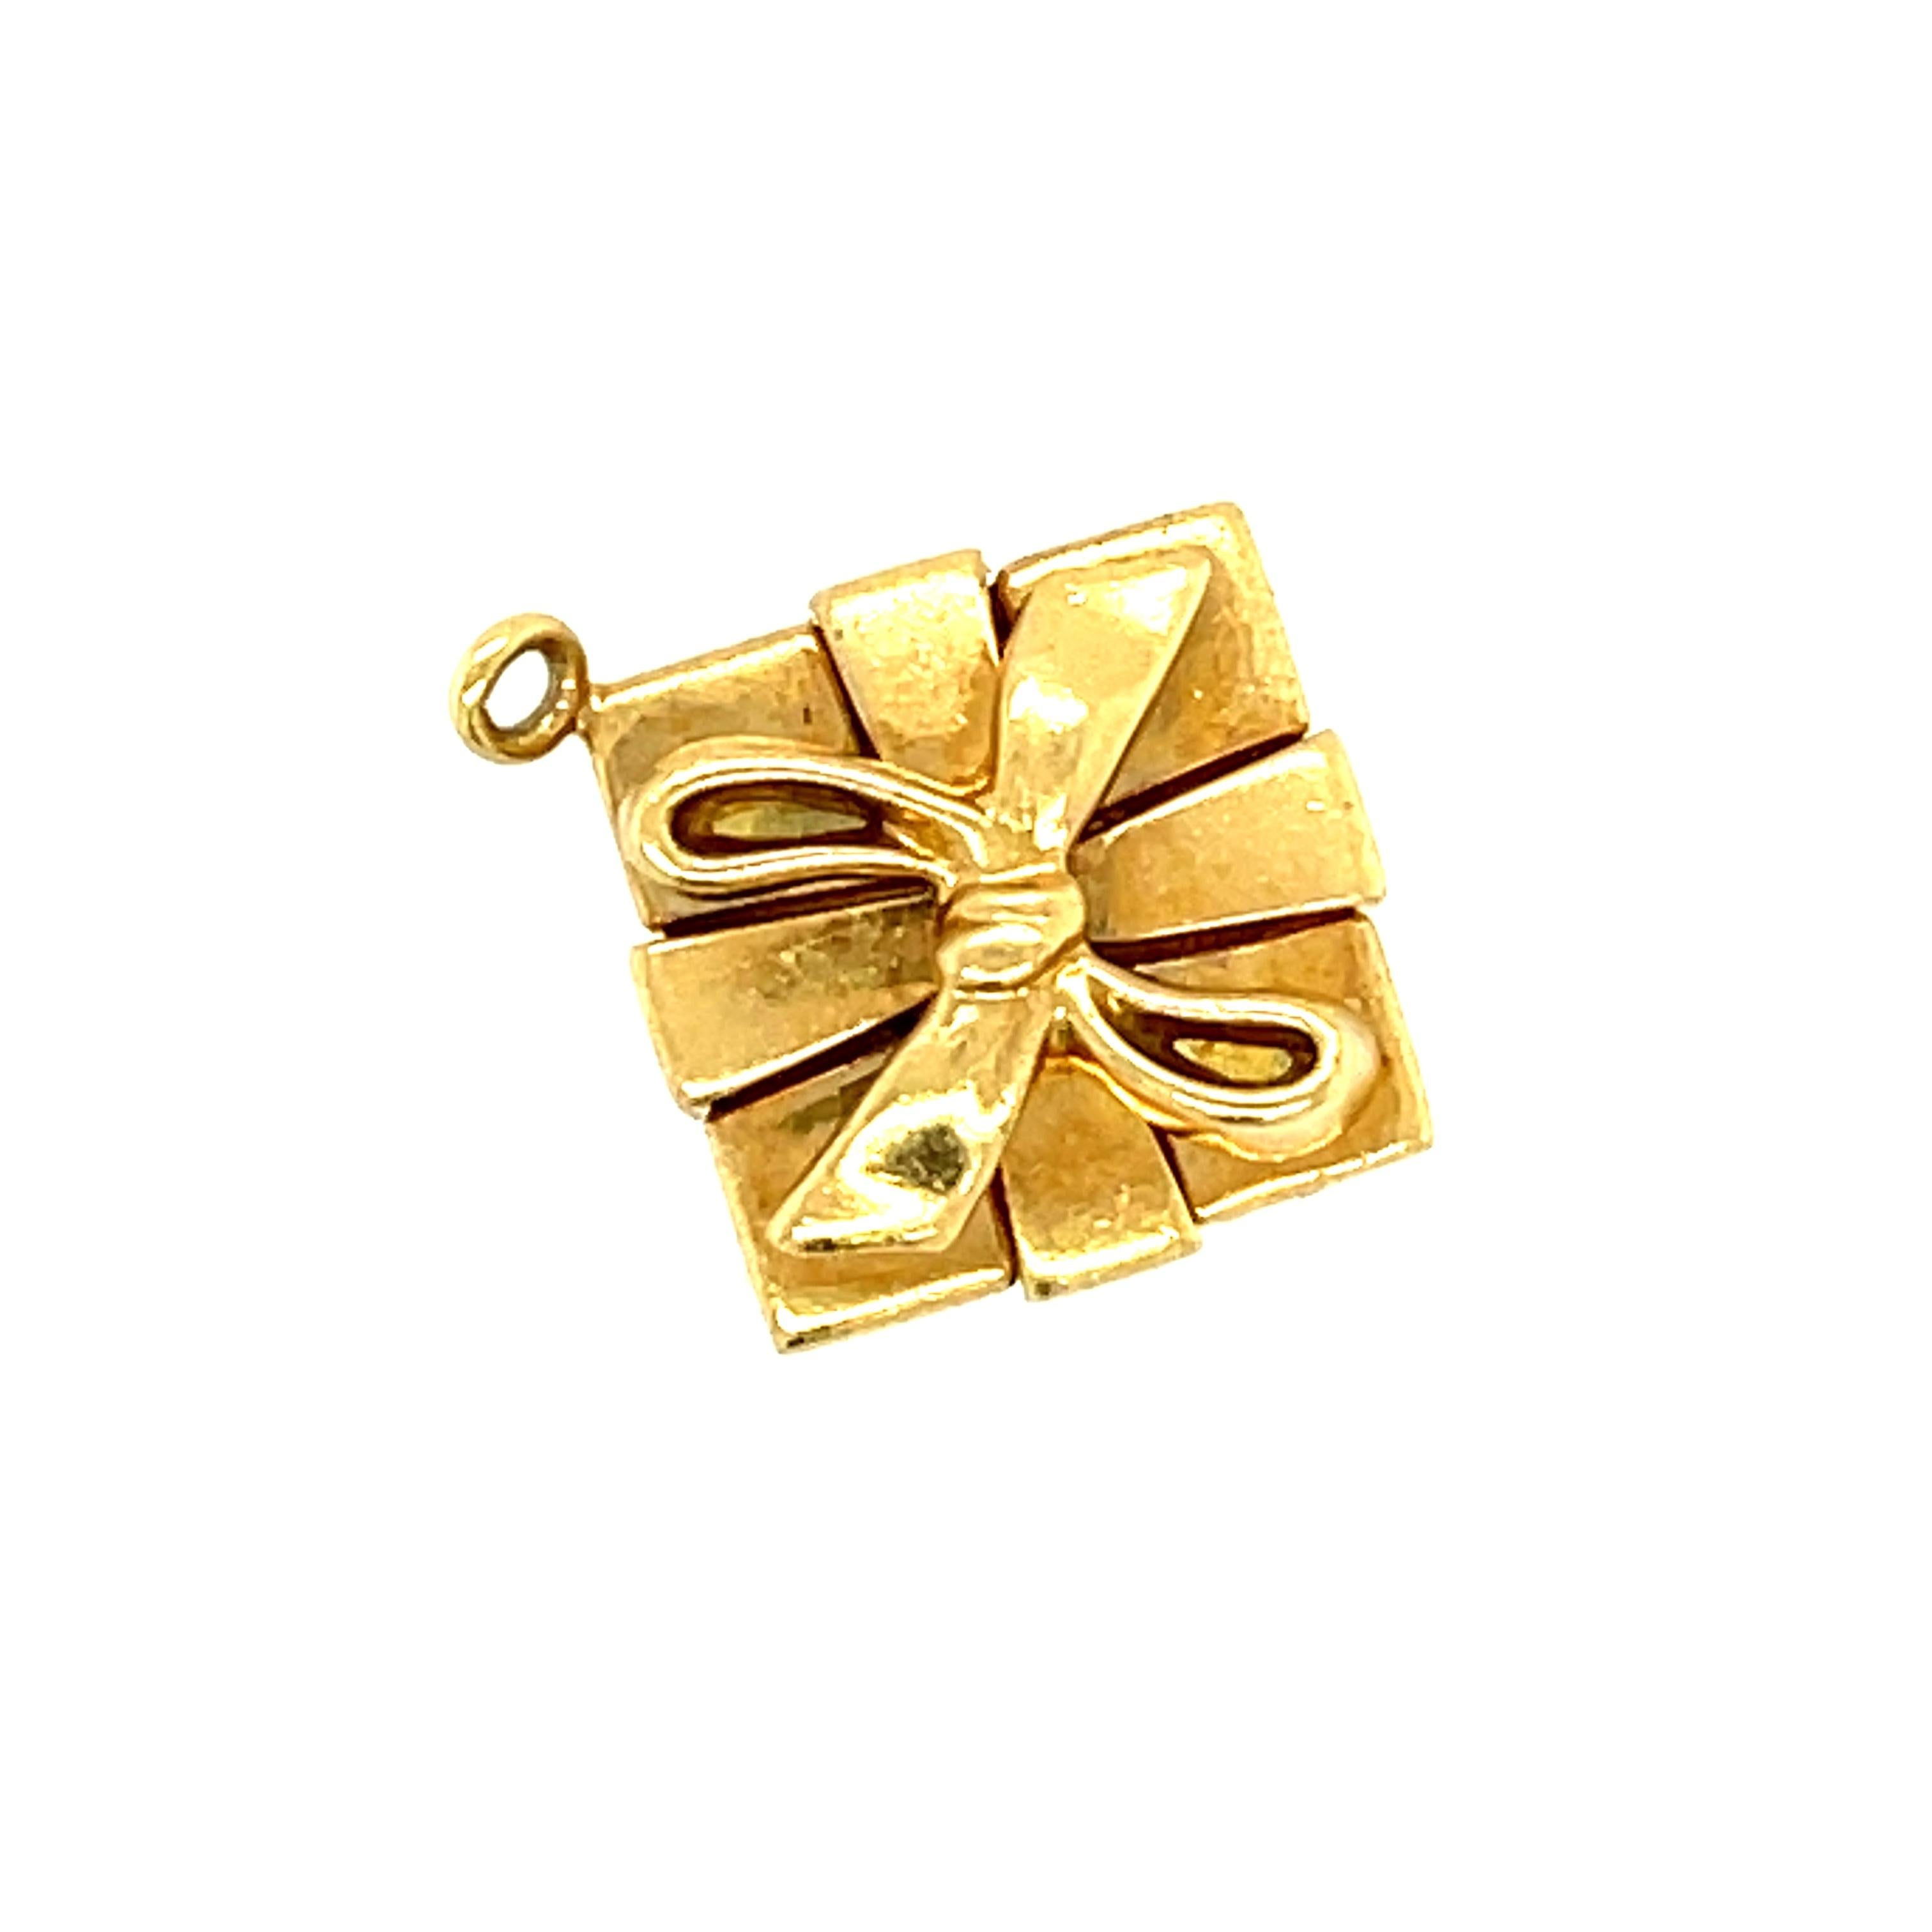 A vintage closed box with bow present charm made in 18k gold by Tiffany & Co. circa 2000. This charm is a rendering of the classic Tiffany blue box with a white bow made in 18k yellow gold. It is stamped Tiffany & Co. 750 on the bottom of the box.